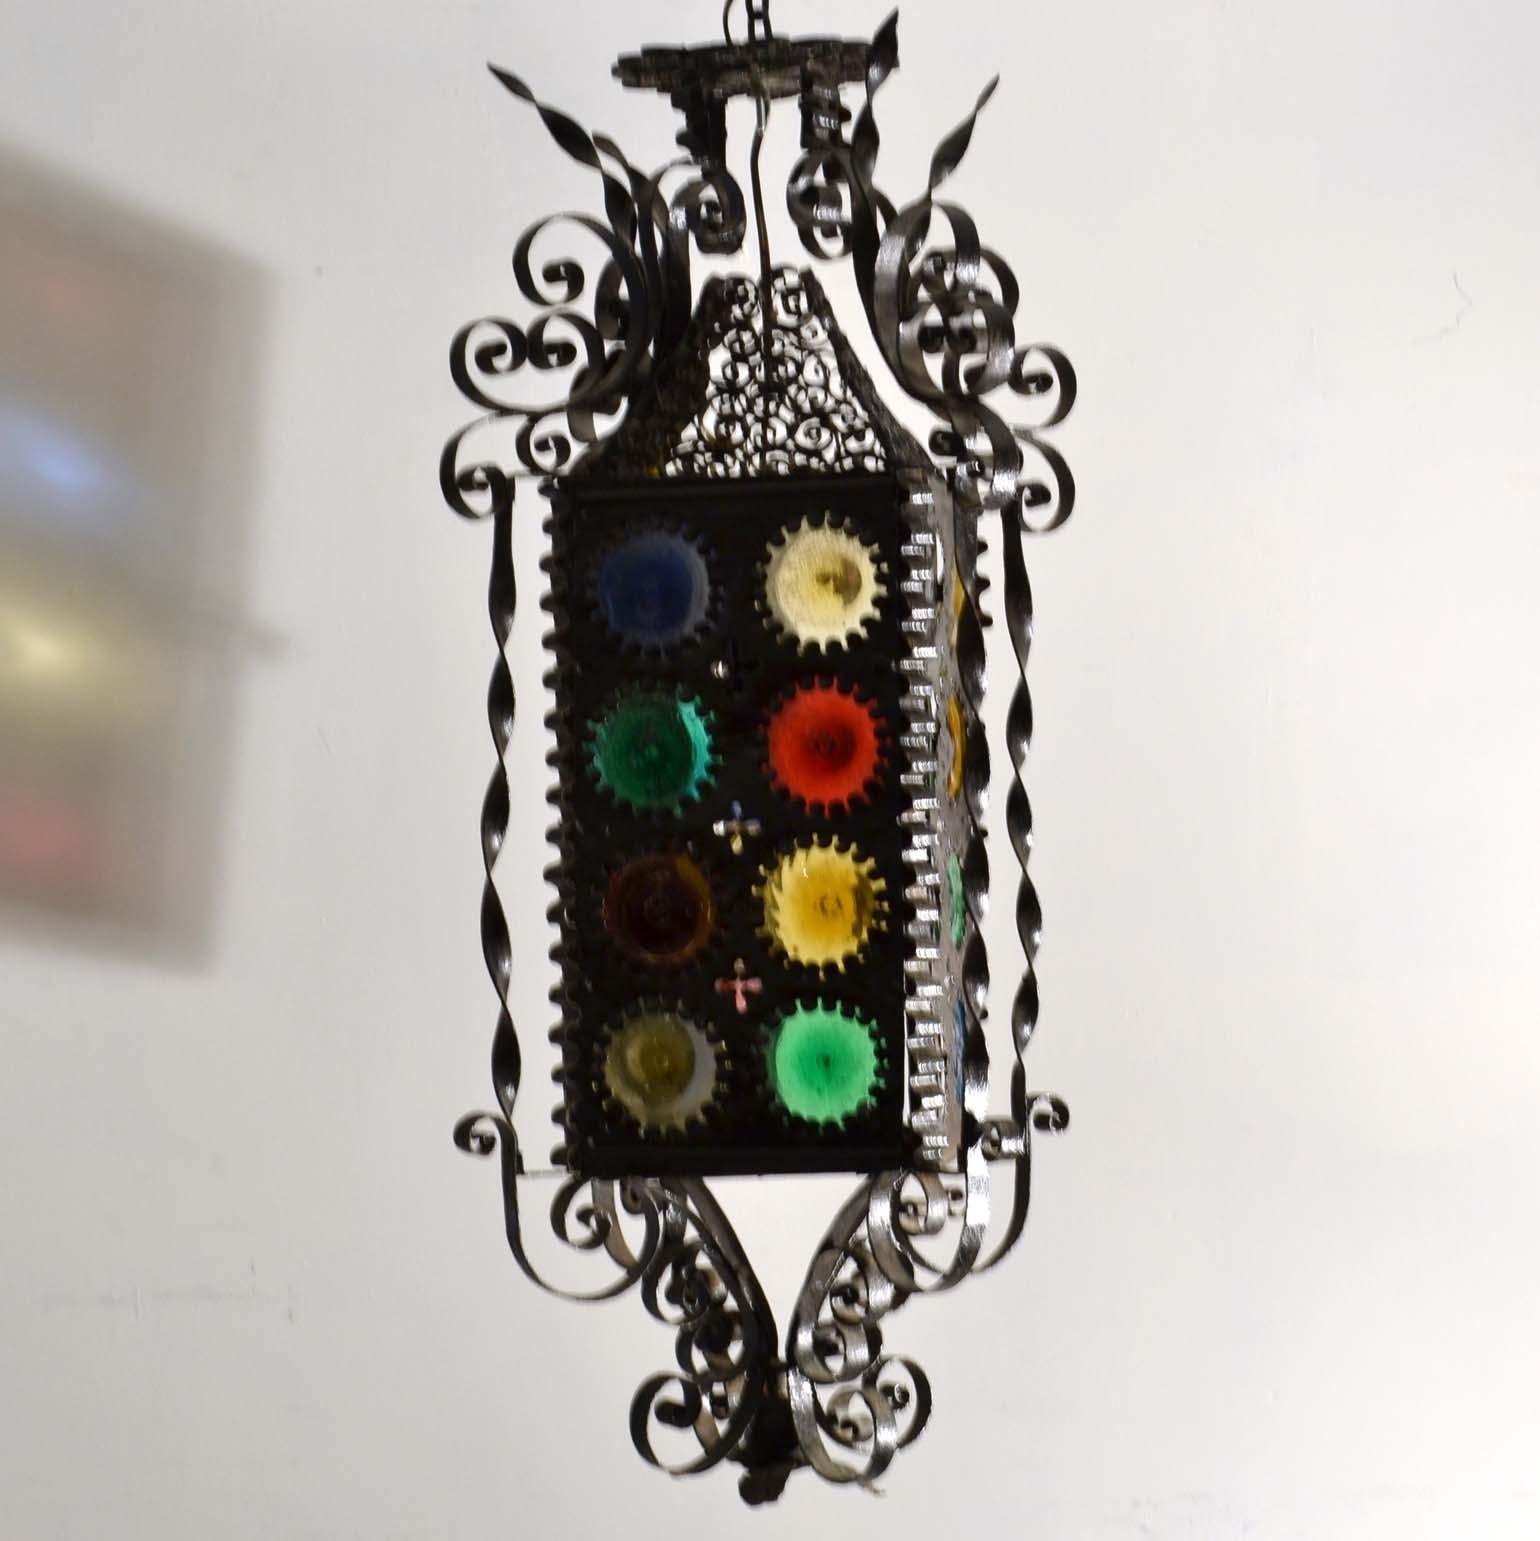 Stained Glass 20th Century Venetian Wrought Iron Lantern with Colored Glass Disks